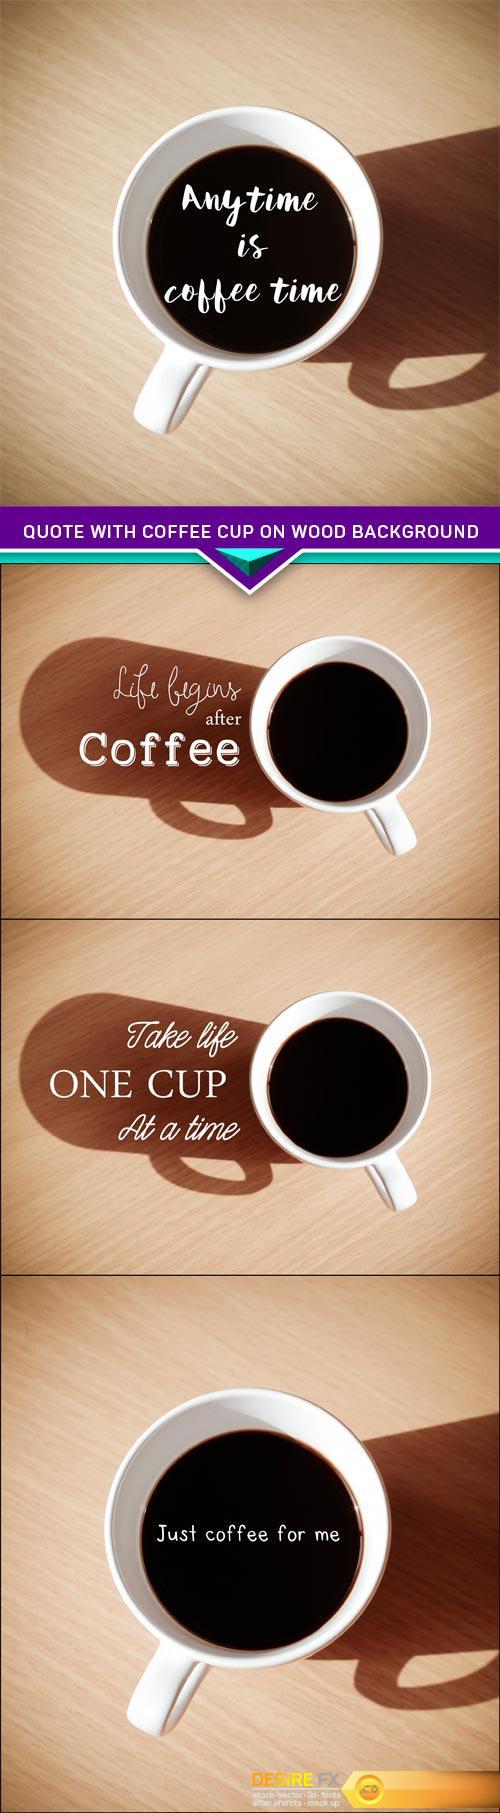 Quote with coffee cup on wood background 4X JPEG